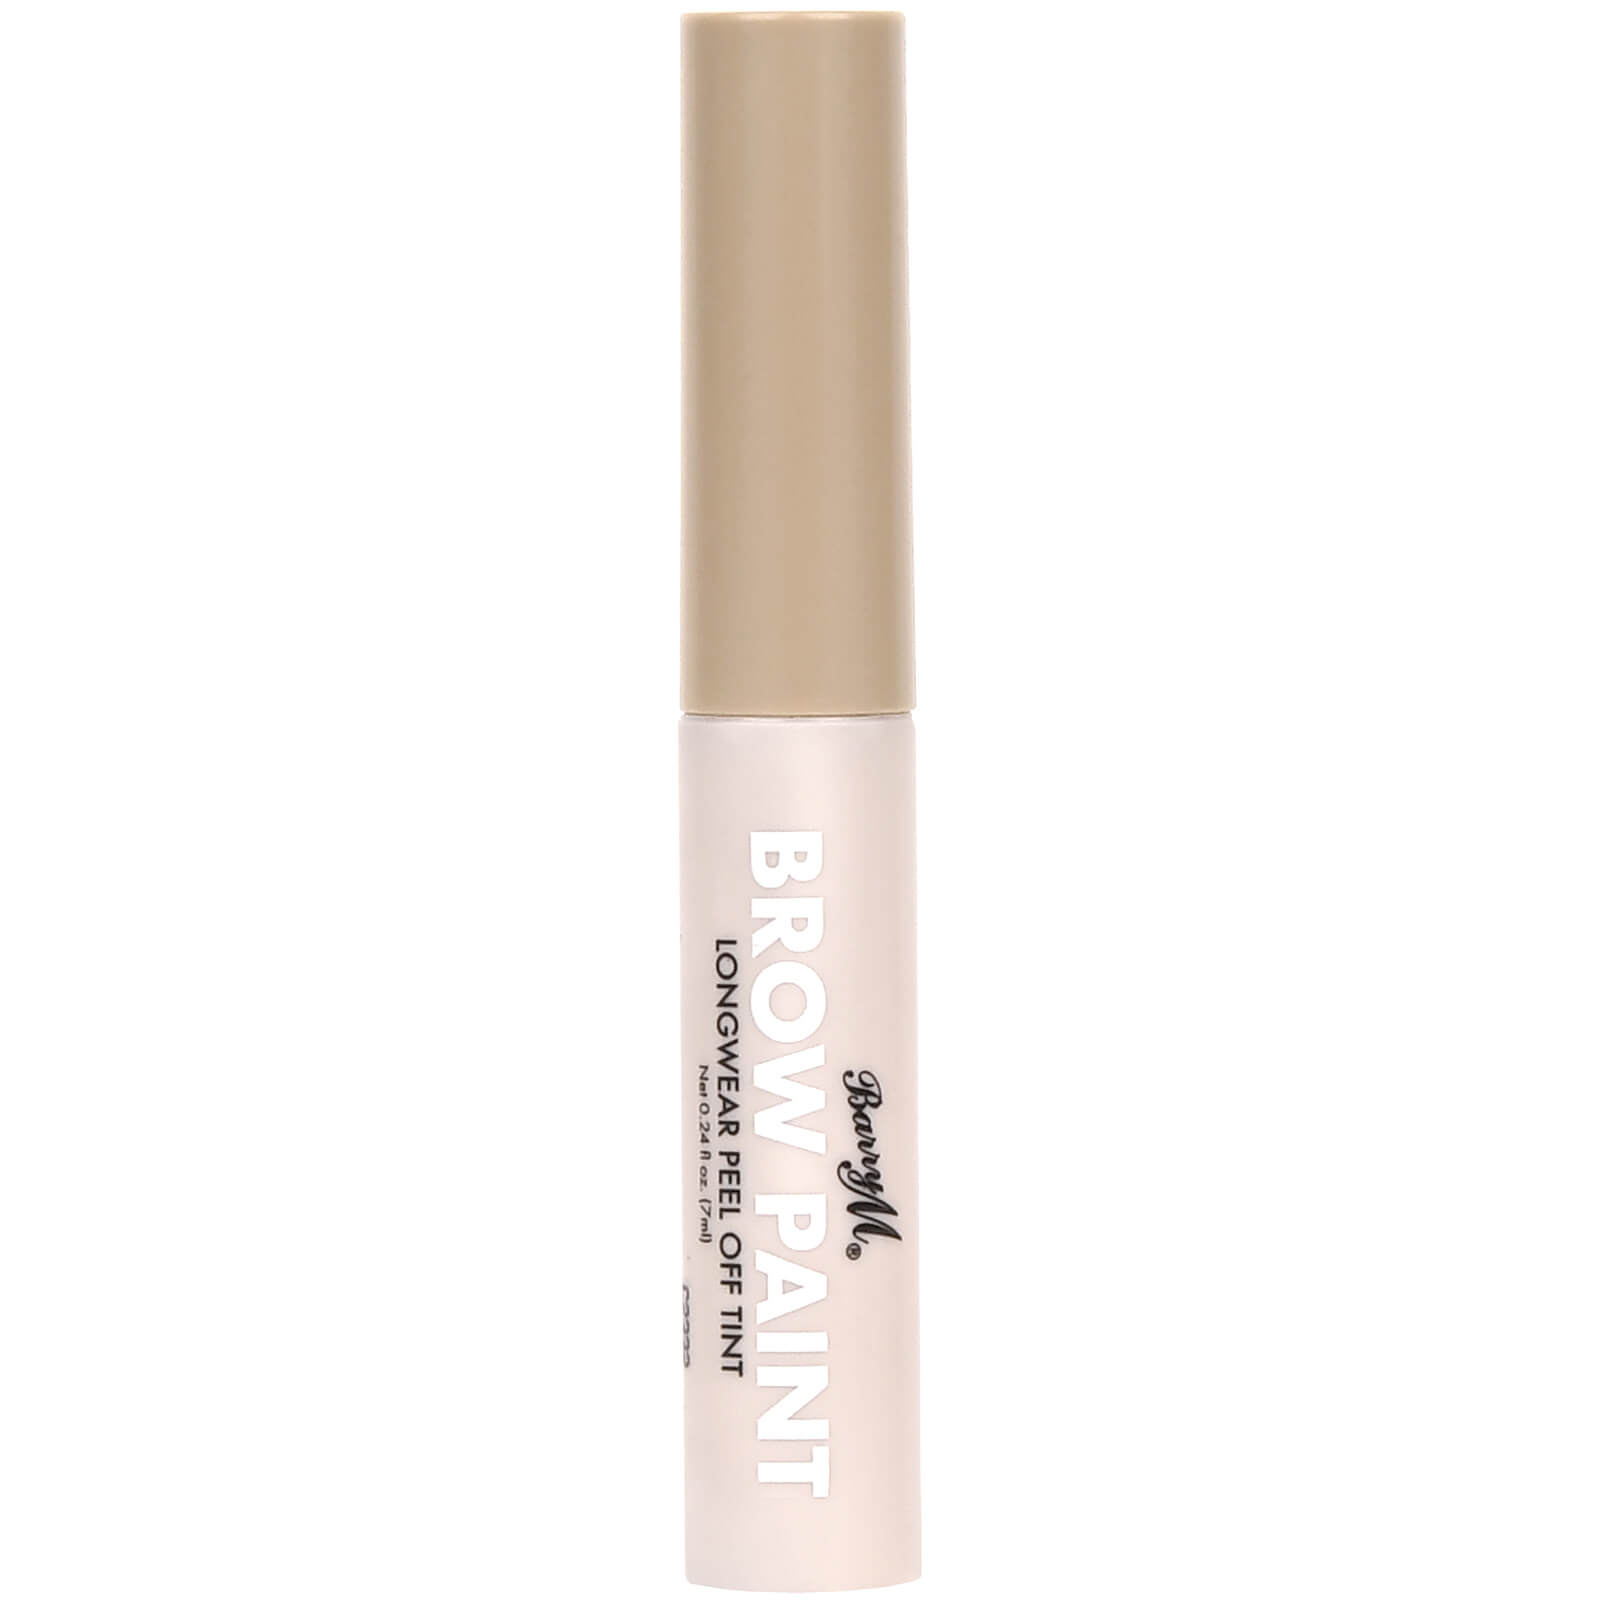 Image of Barry M Cosmetics Brow Paint Longwear Peel off Tint 7.5g (Various Shades) - Light Brown